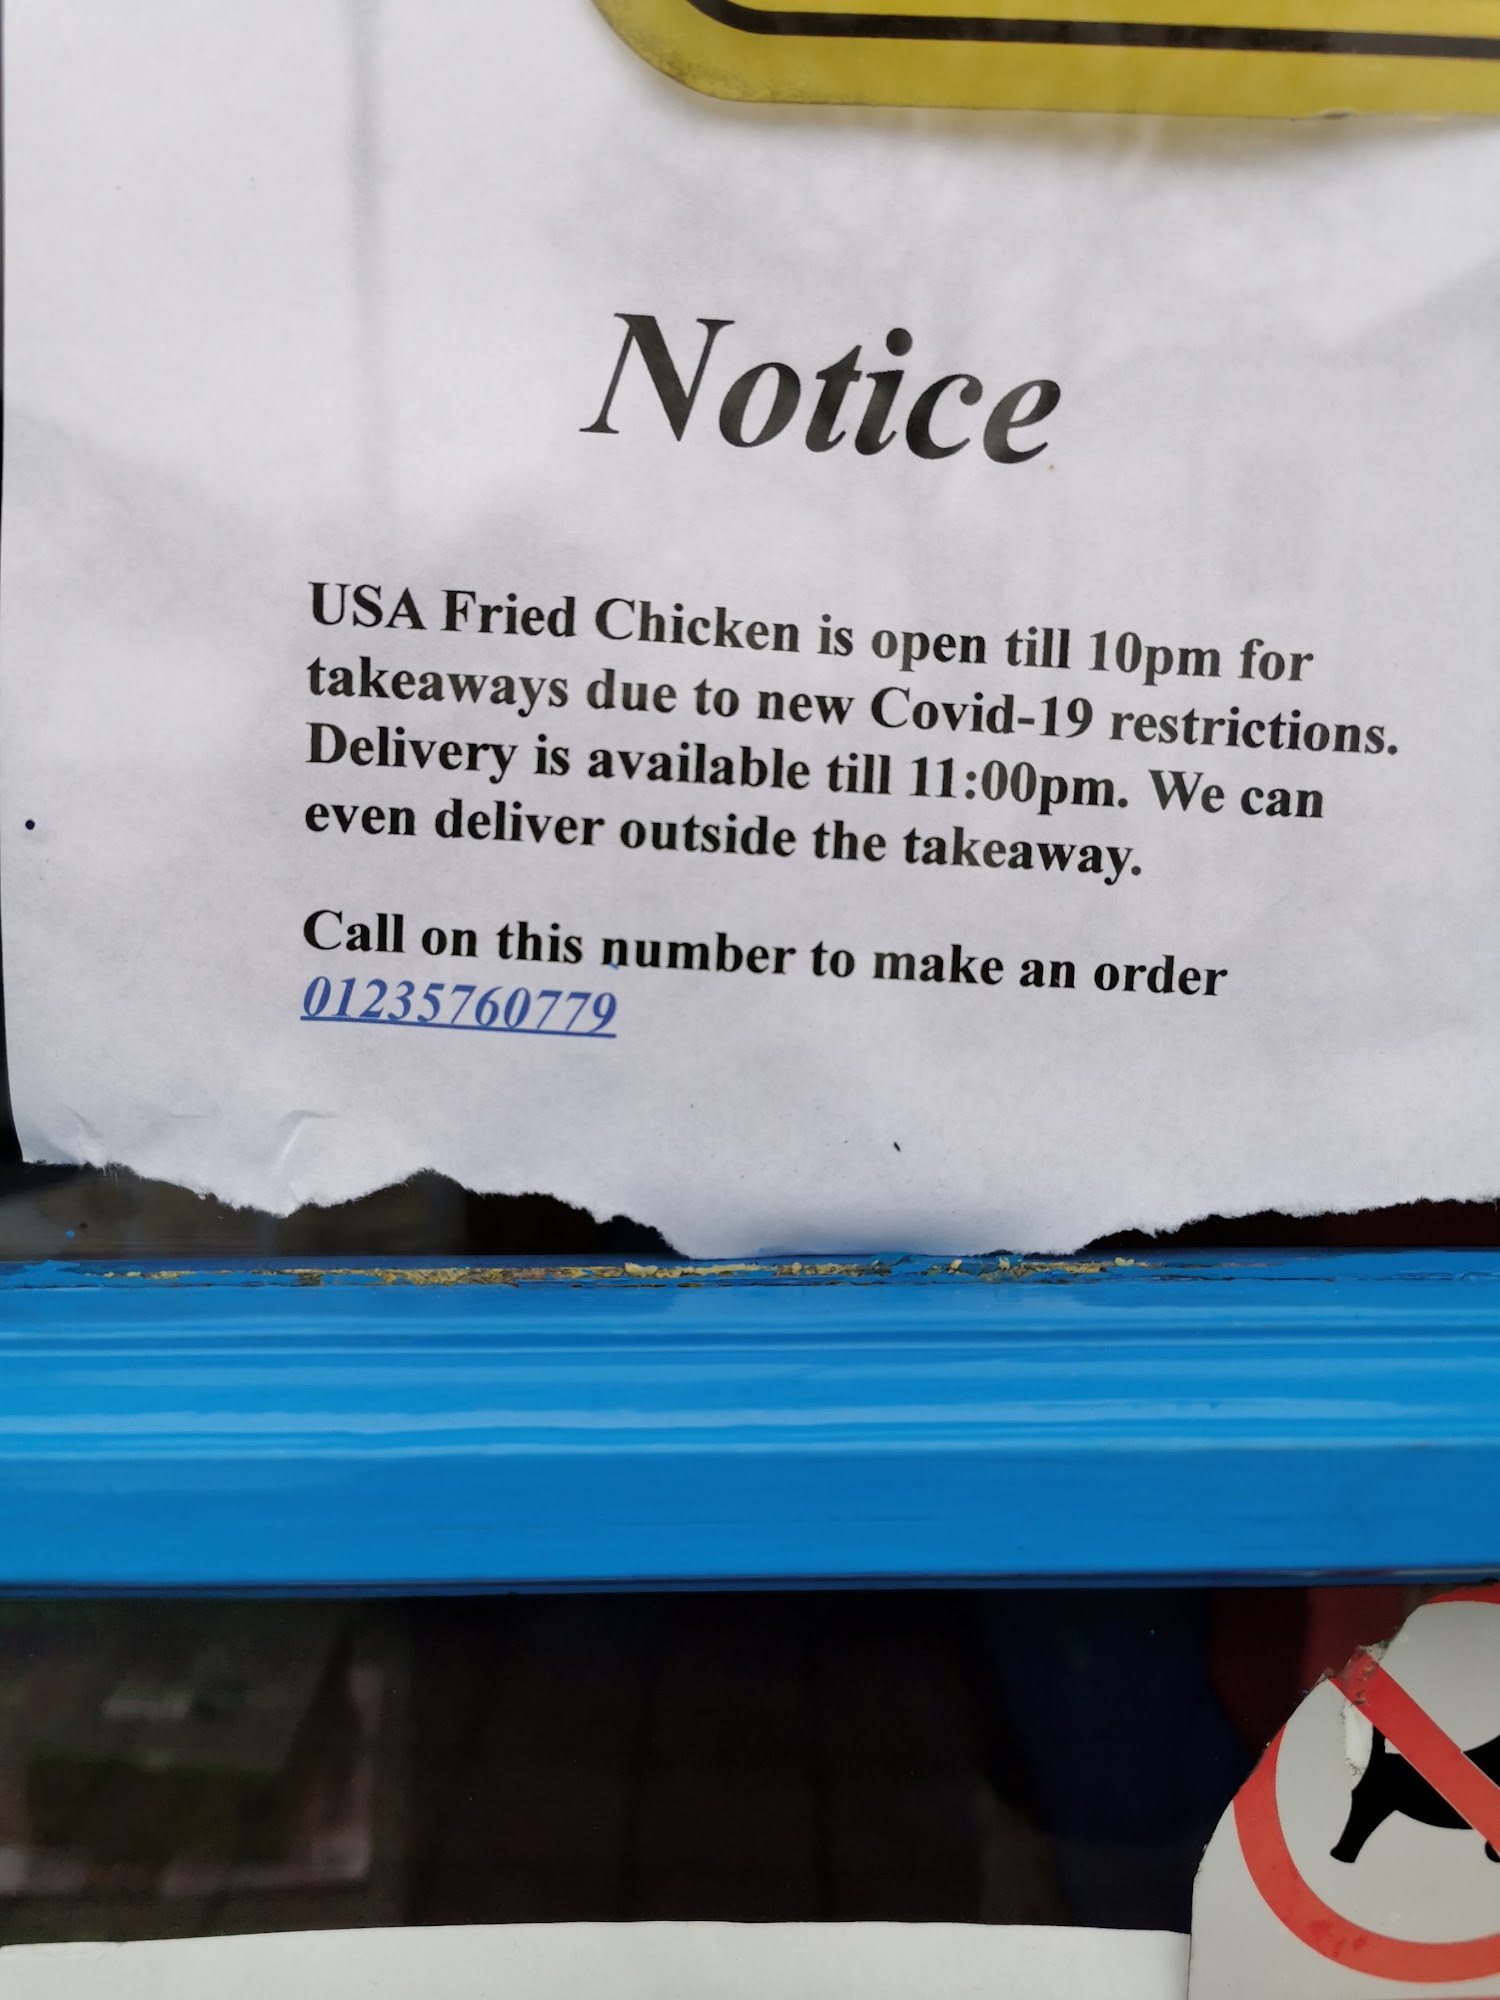 USA Fried Chicken and Pizza